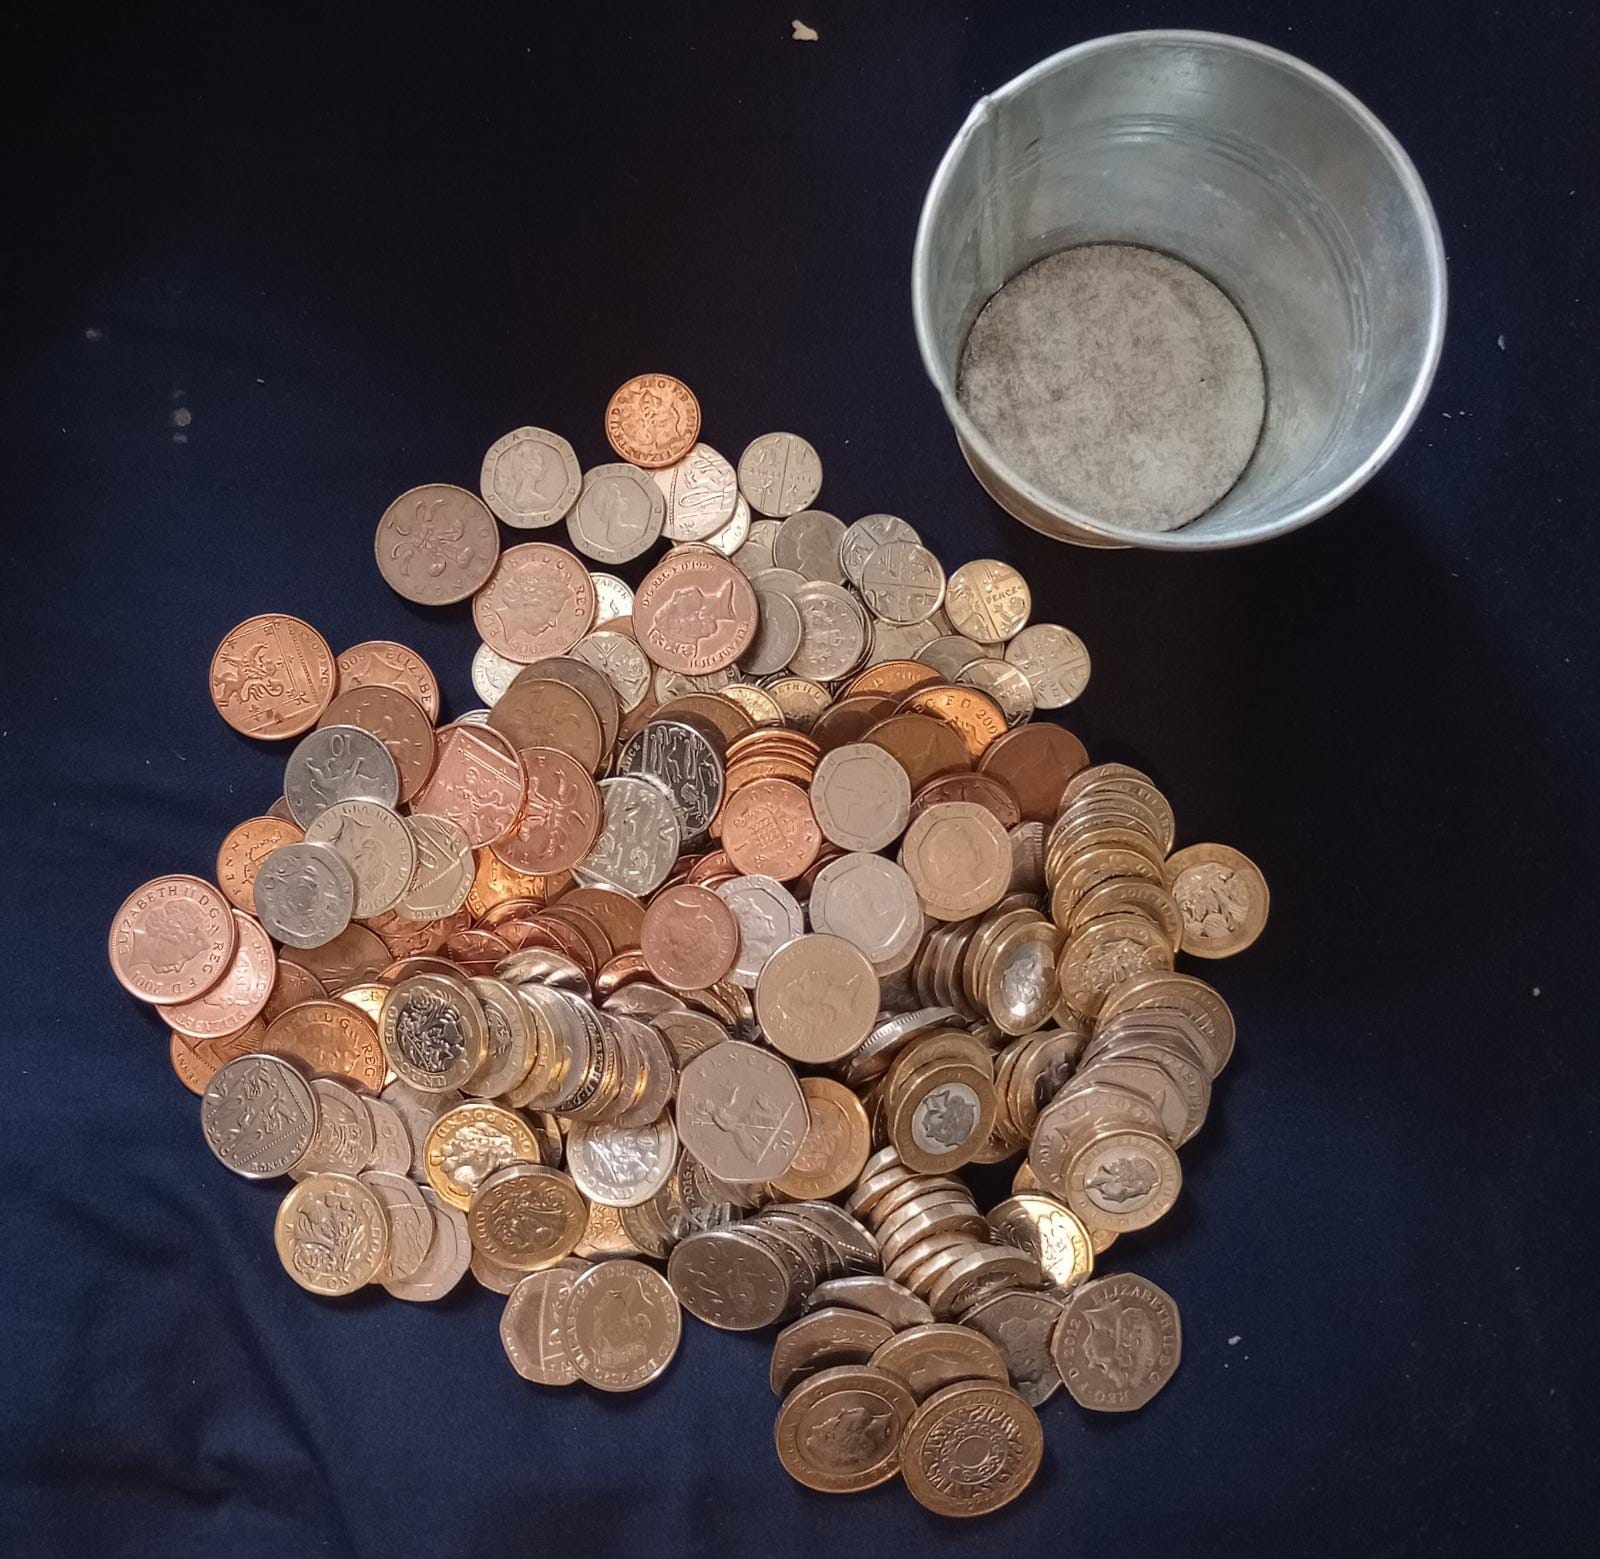 The pile of coins and change pot